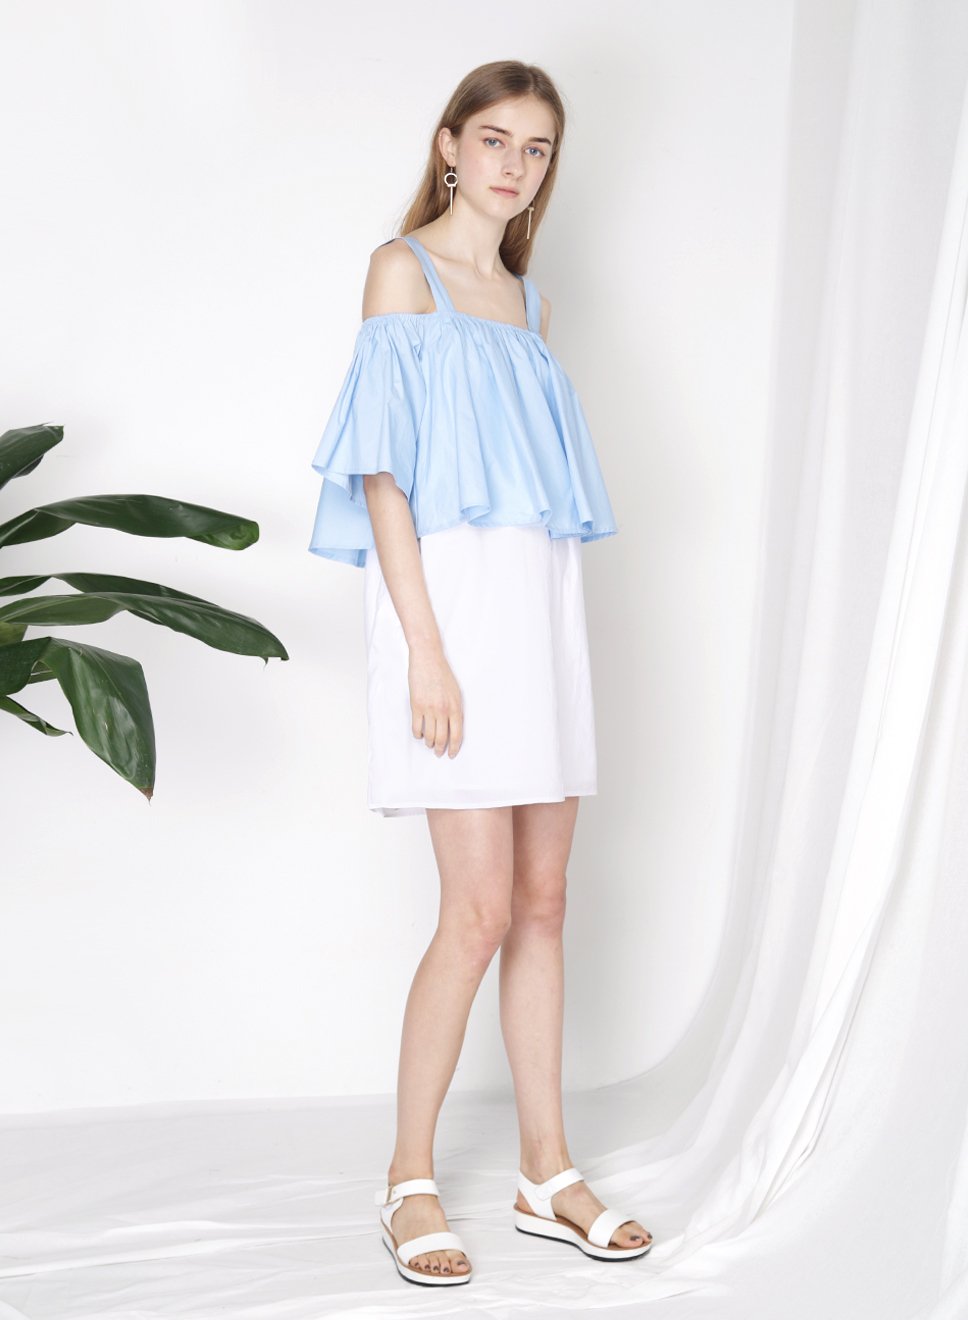 SMITTEN Contrast Cold Shoulder Dress (Blue) - And Well Dressed